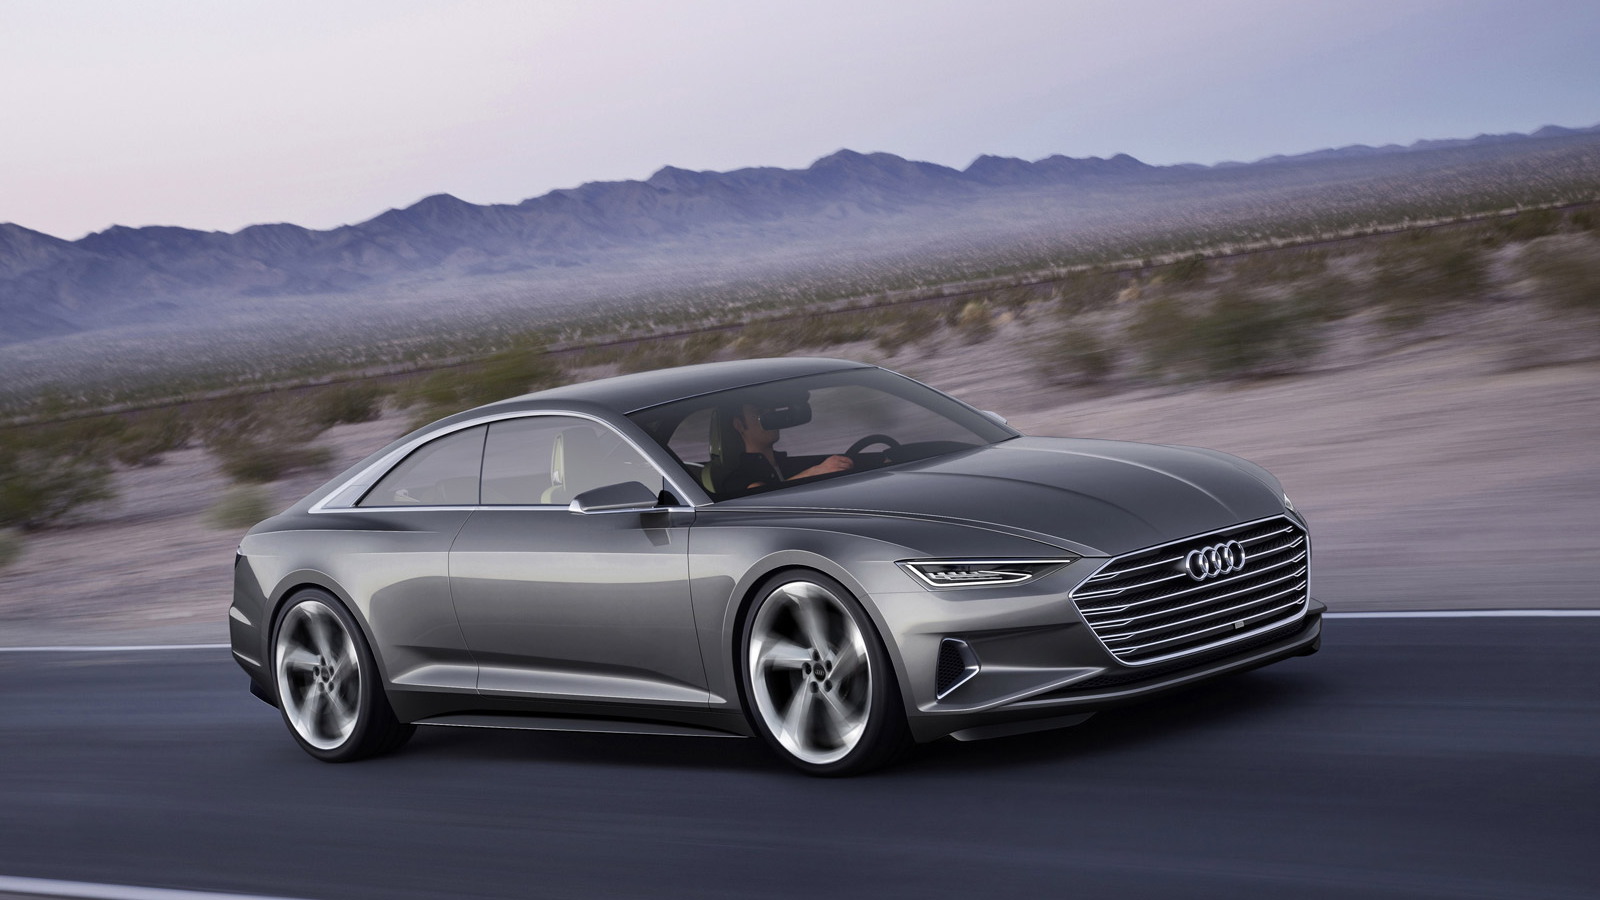 Audi Prologue Piloted Driving concept, 2015 Consumer Electronics Show.